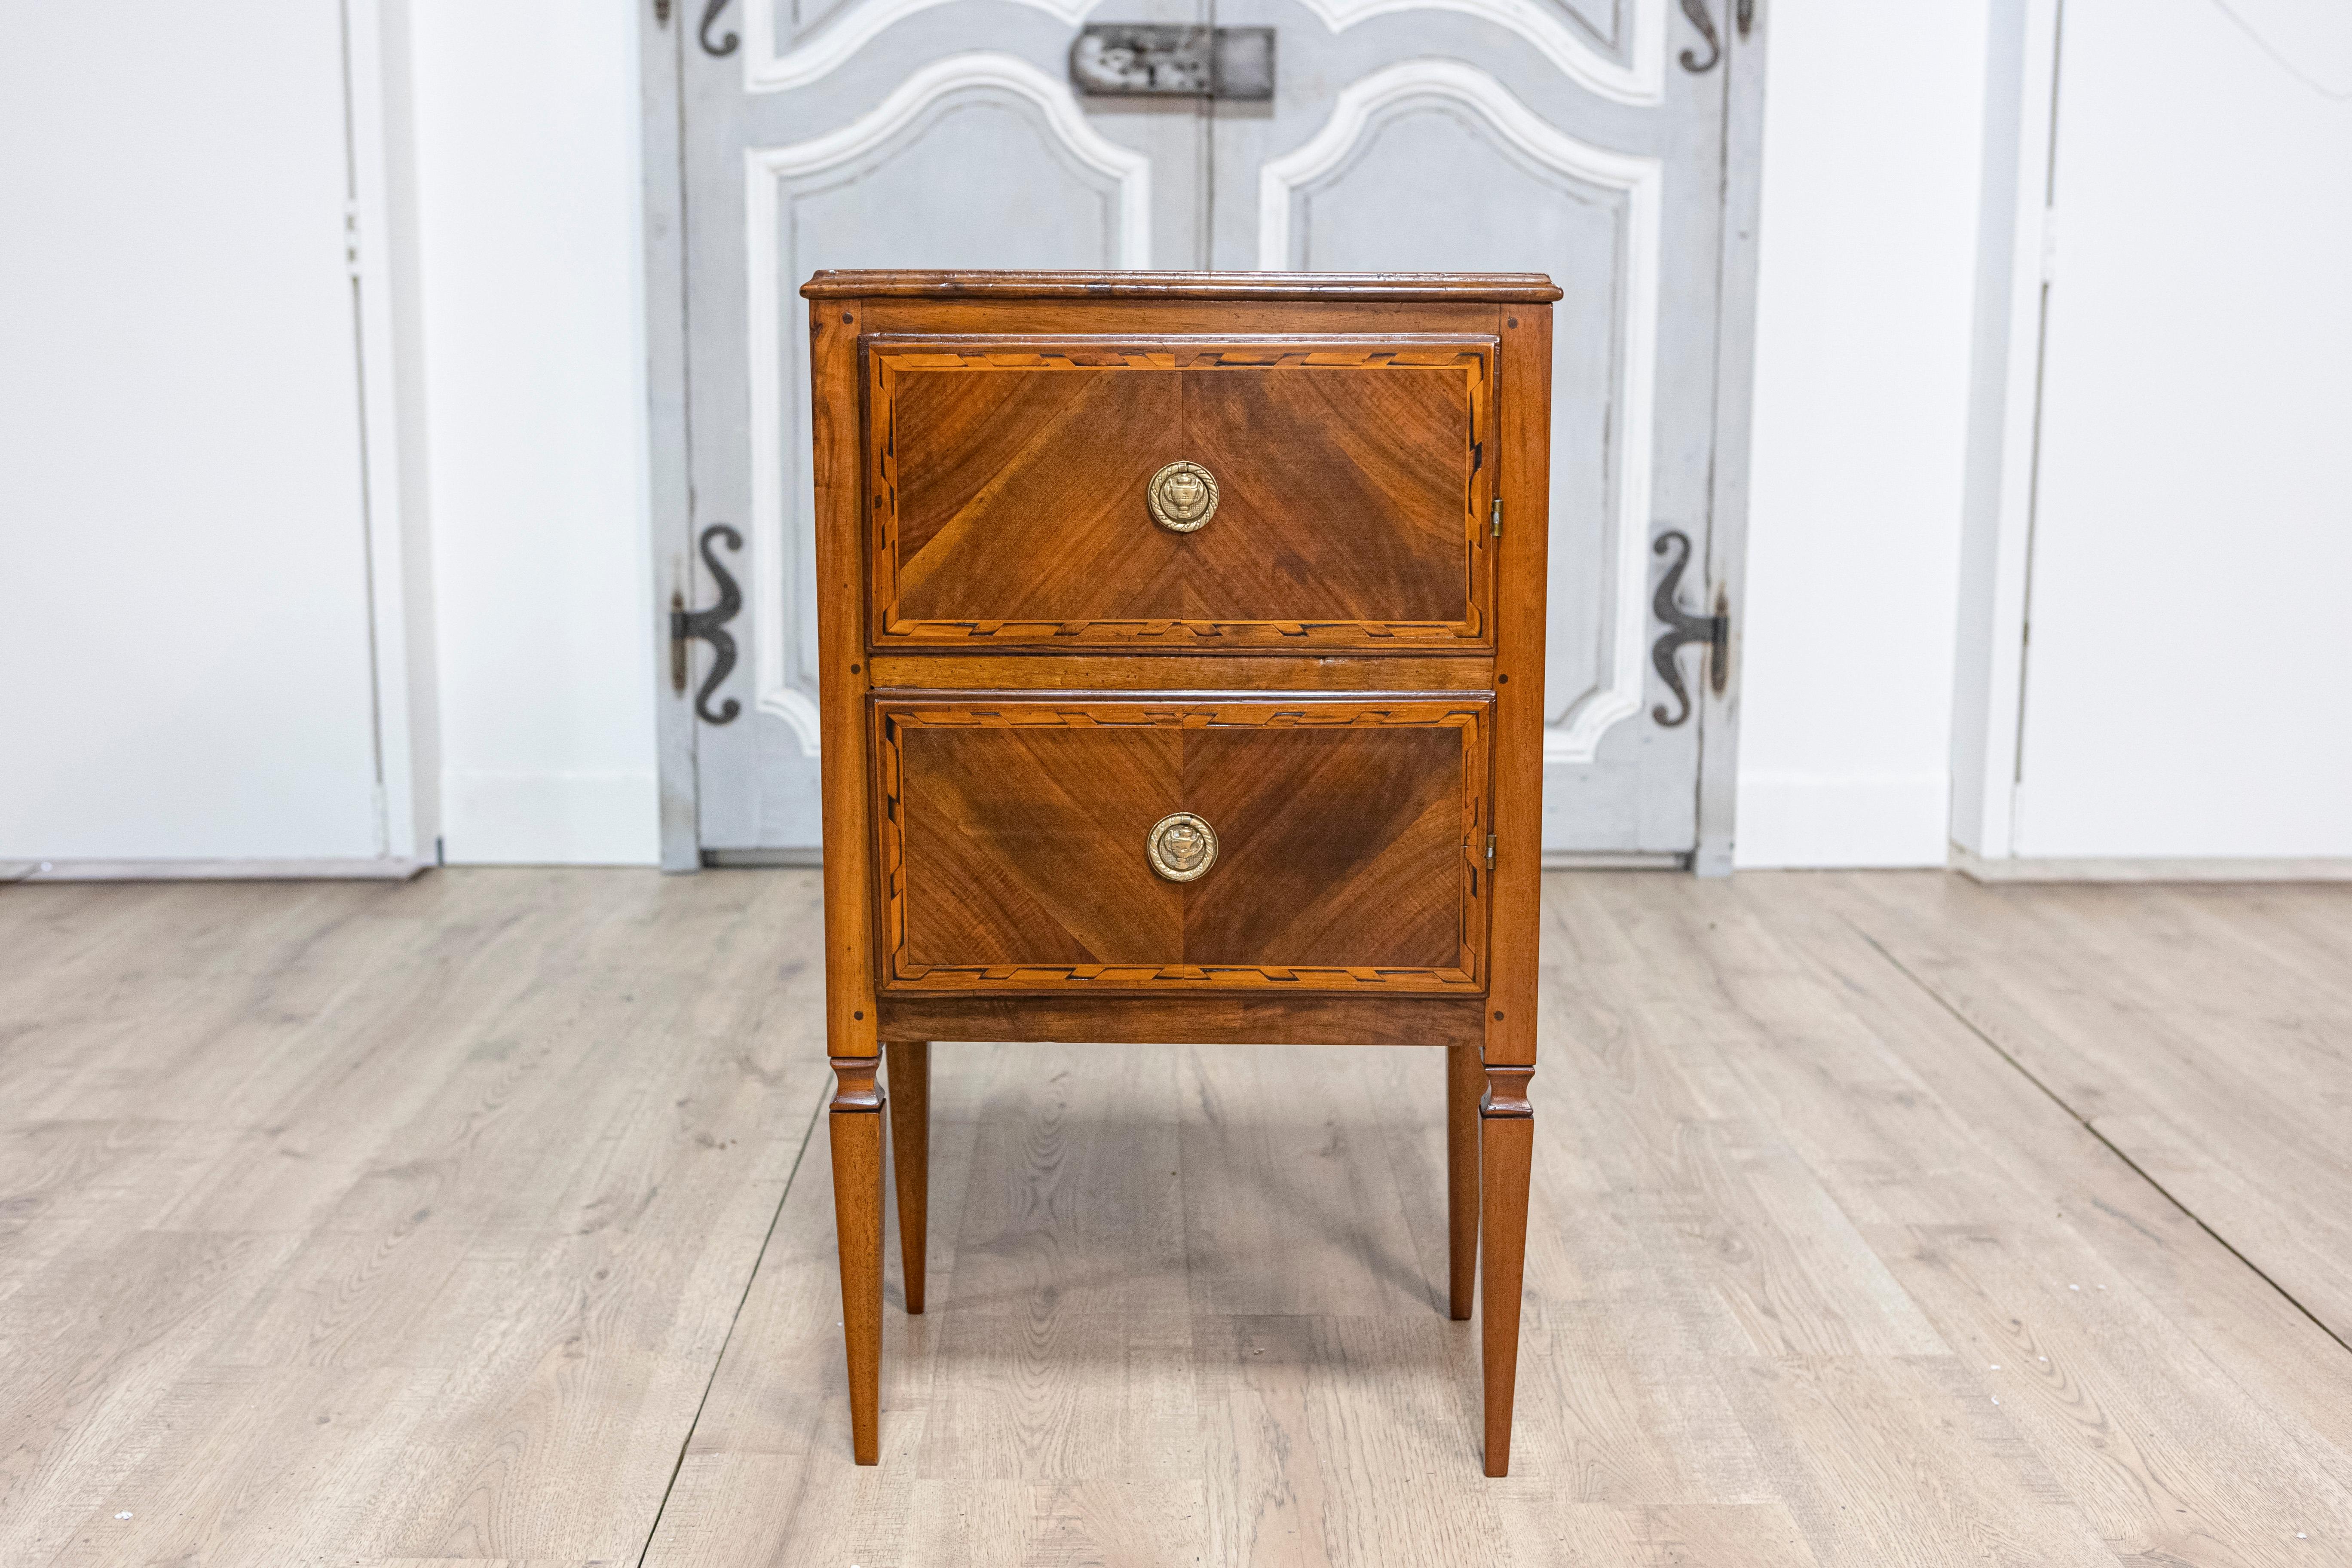 19th Century Pair of Italian Neoclassical Style Walnut Nightstands with Bookmatched Veneer For Sale